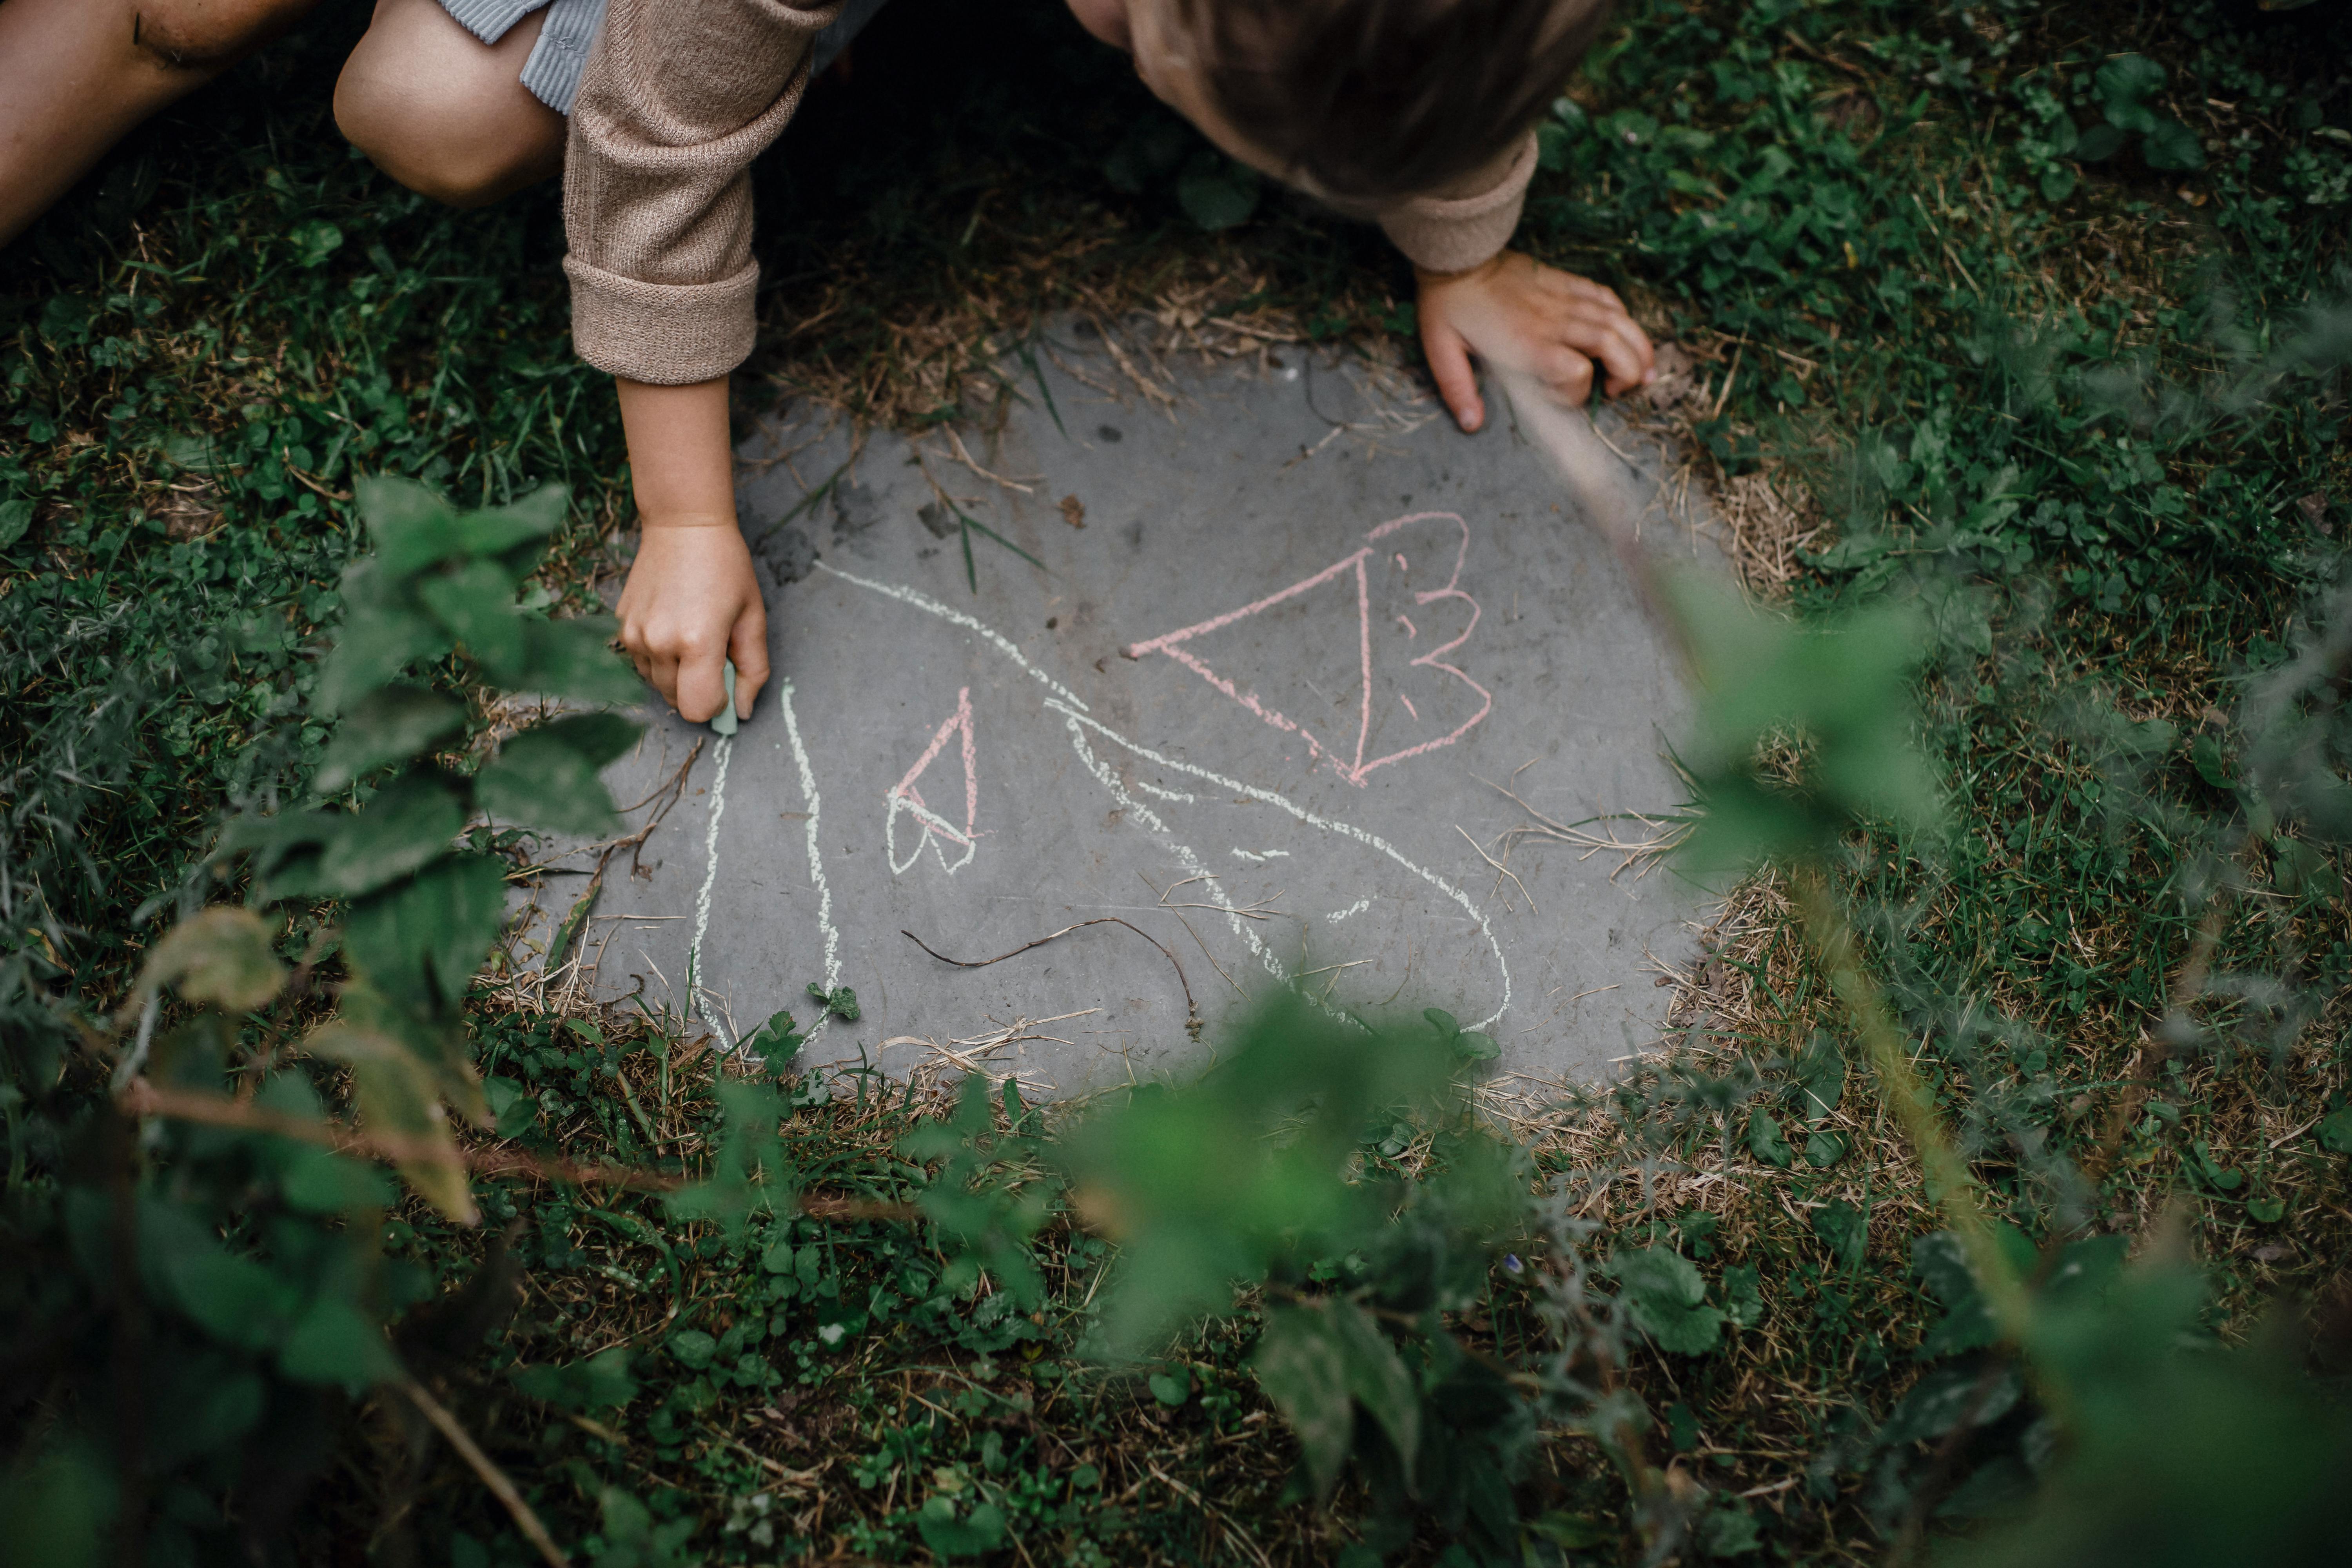 child drawing picture on concrete block in grassy yard